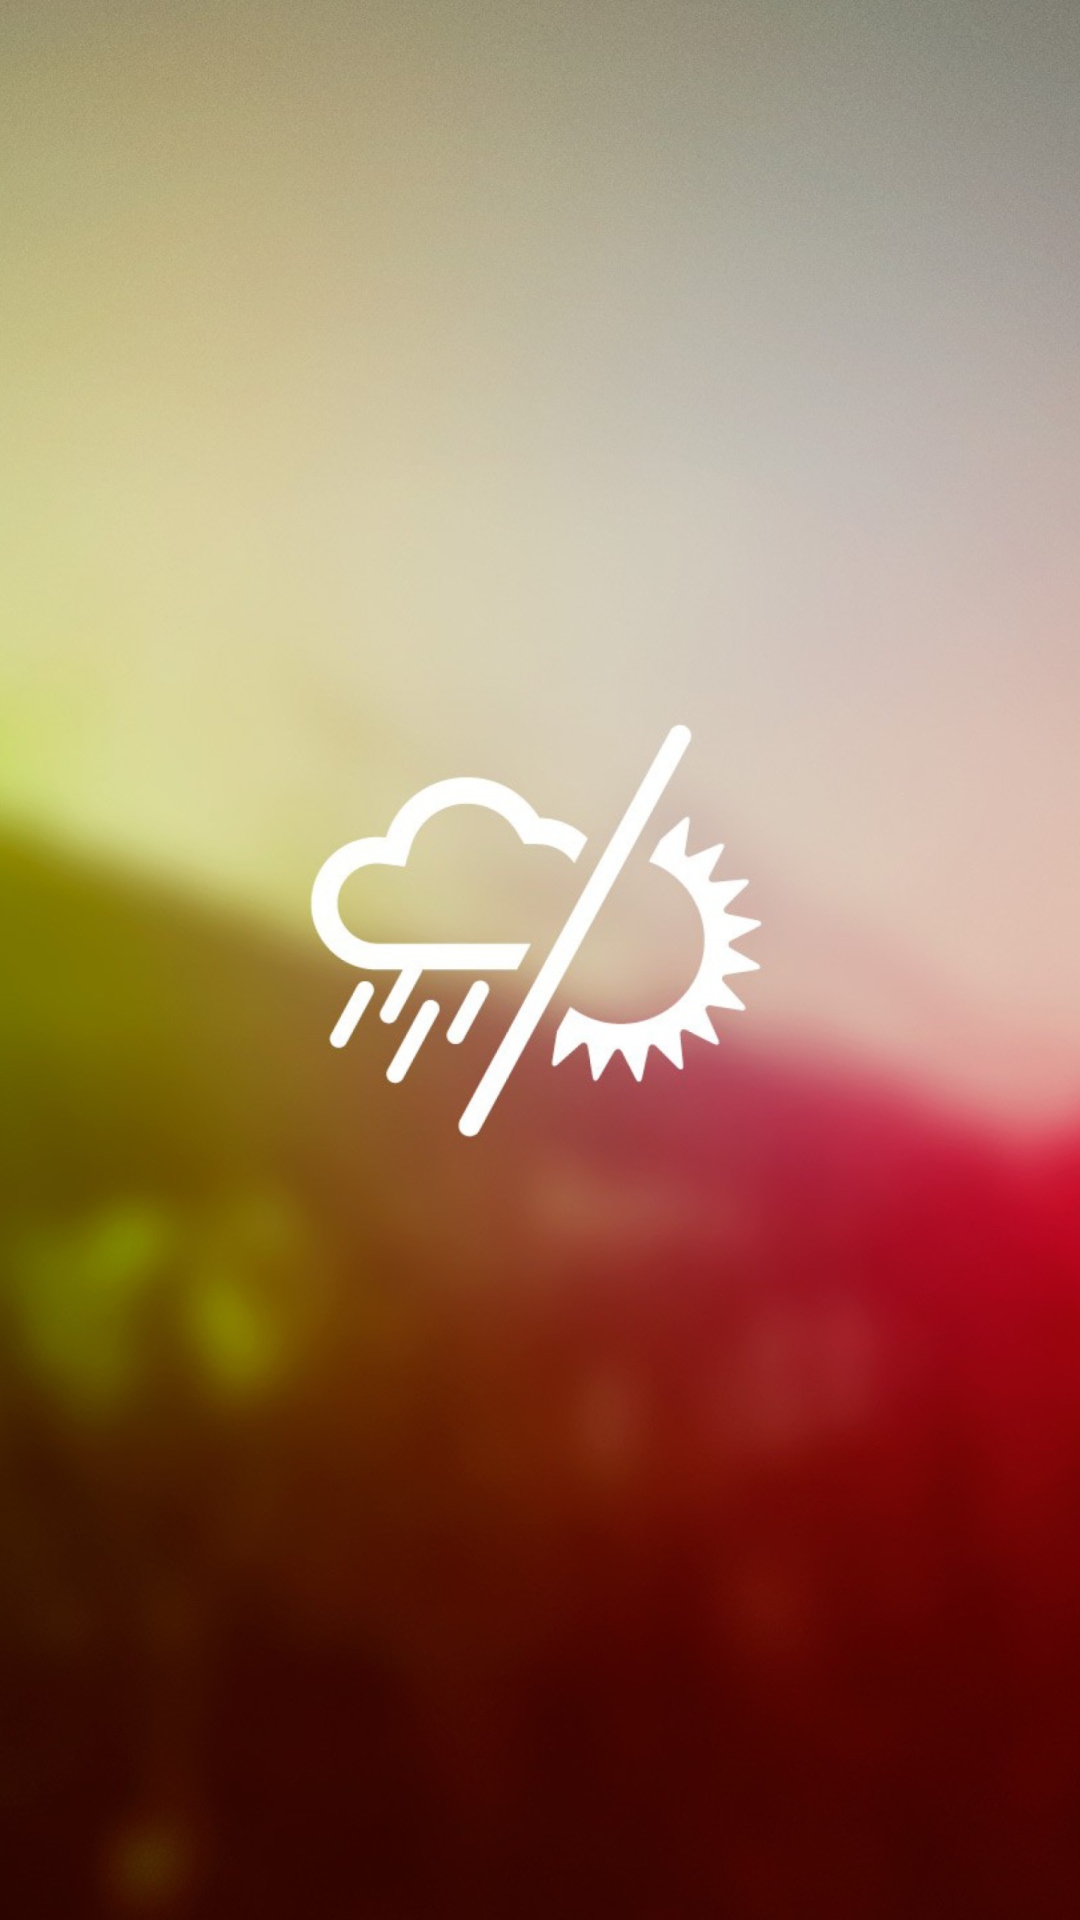 Rainy Or Sunny Weather wallpaper 1080x1920